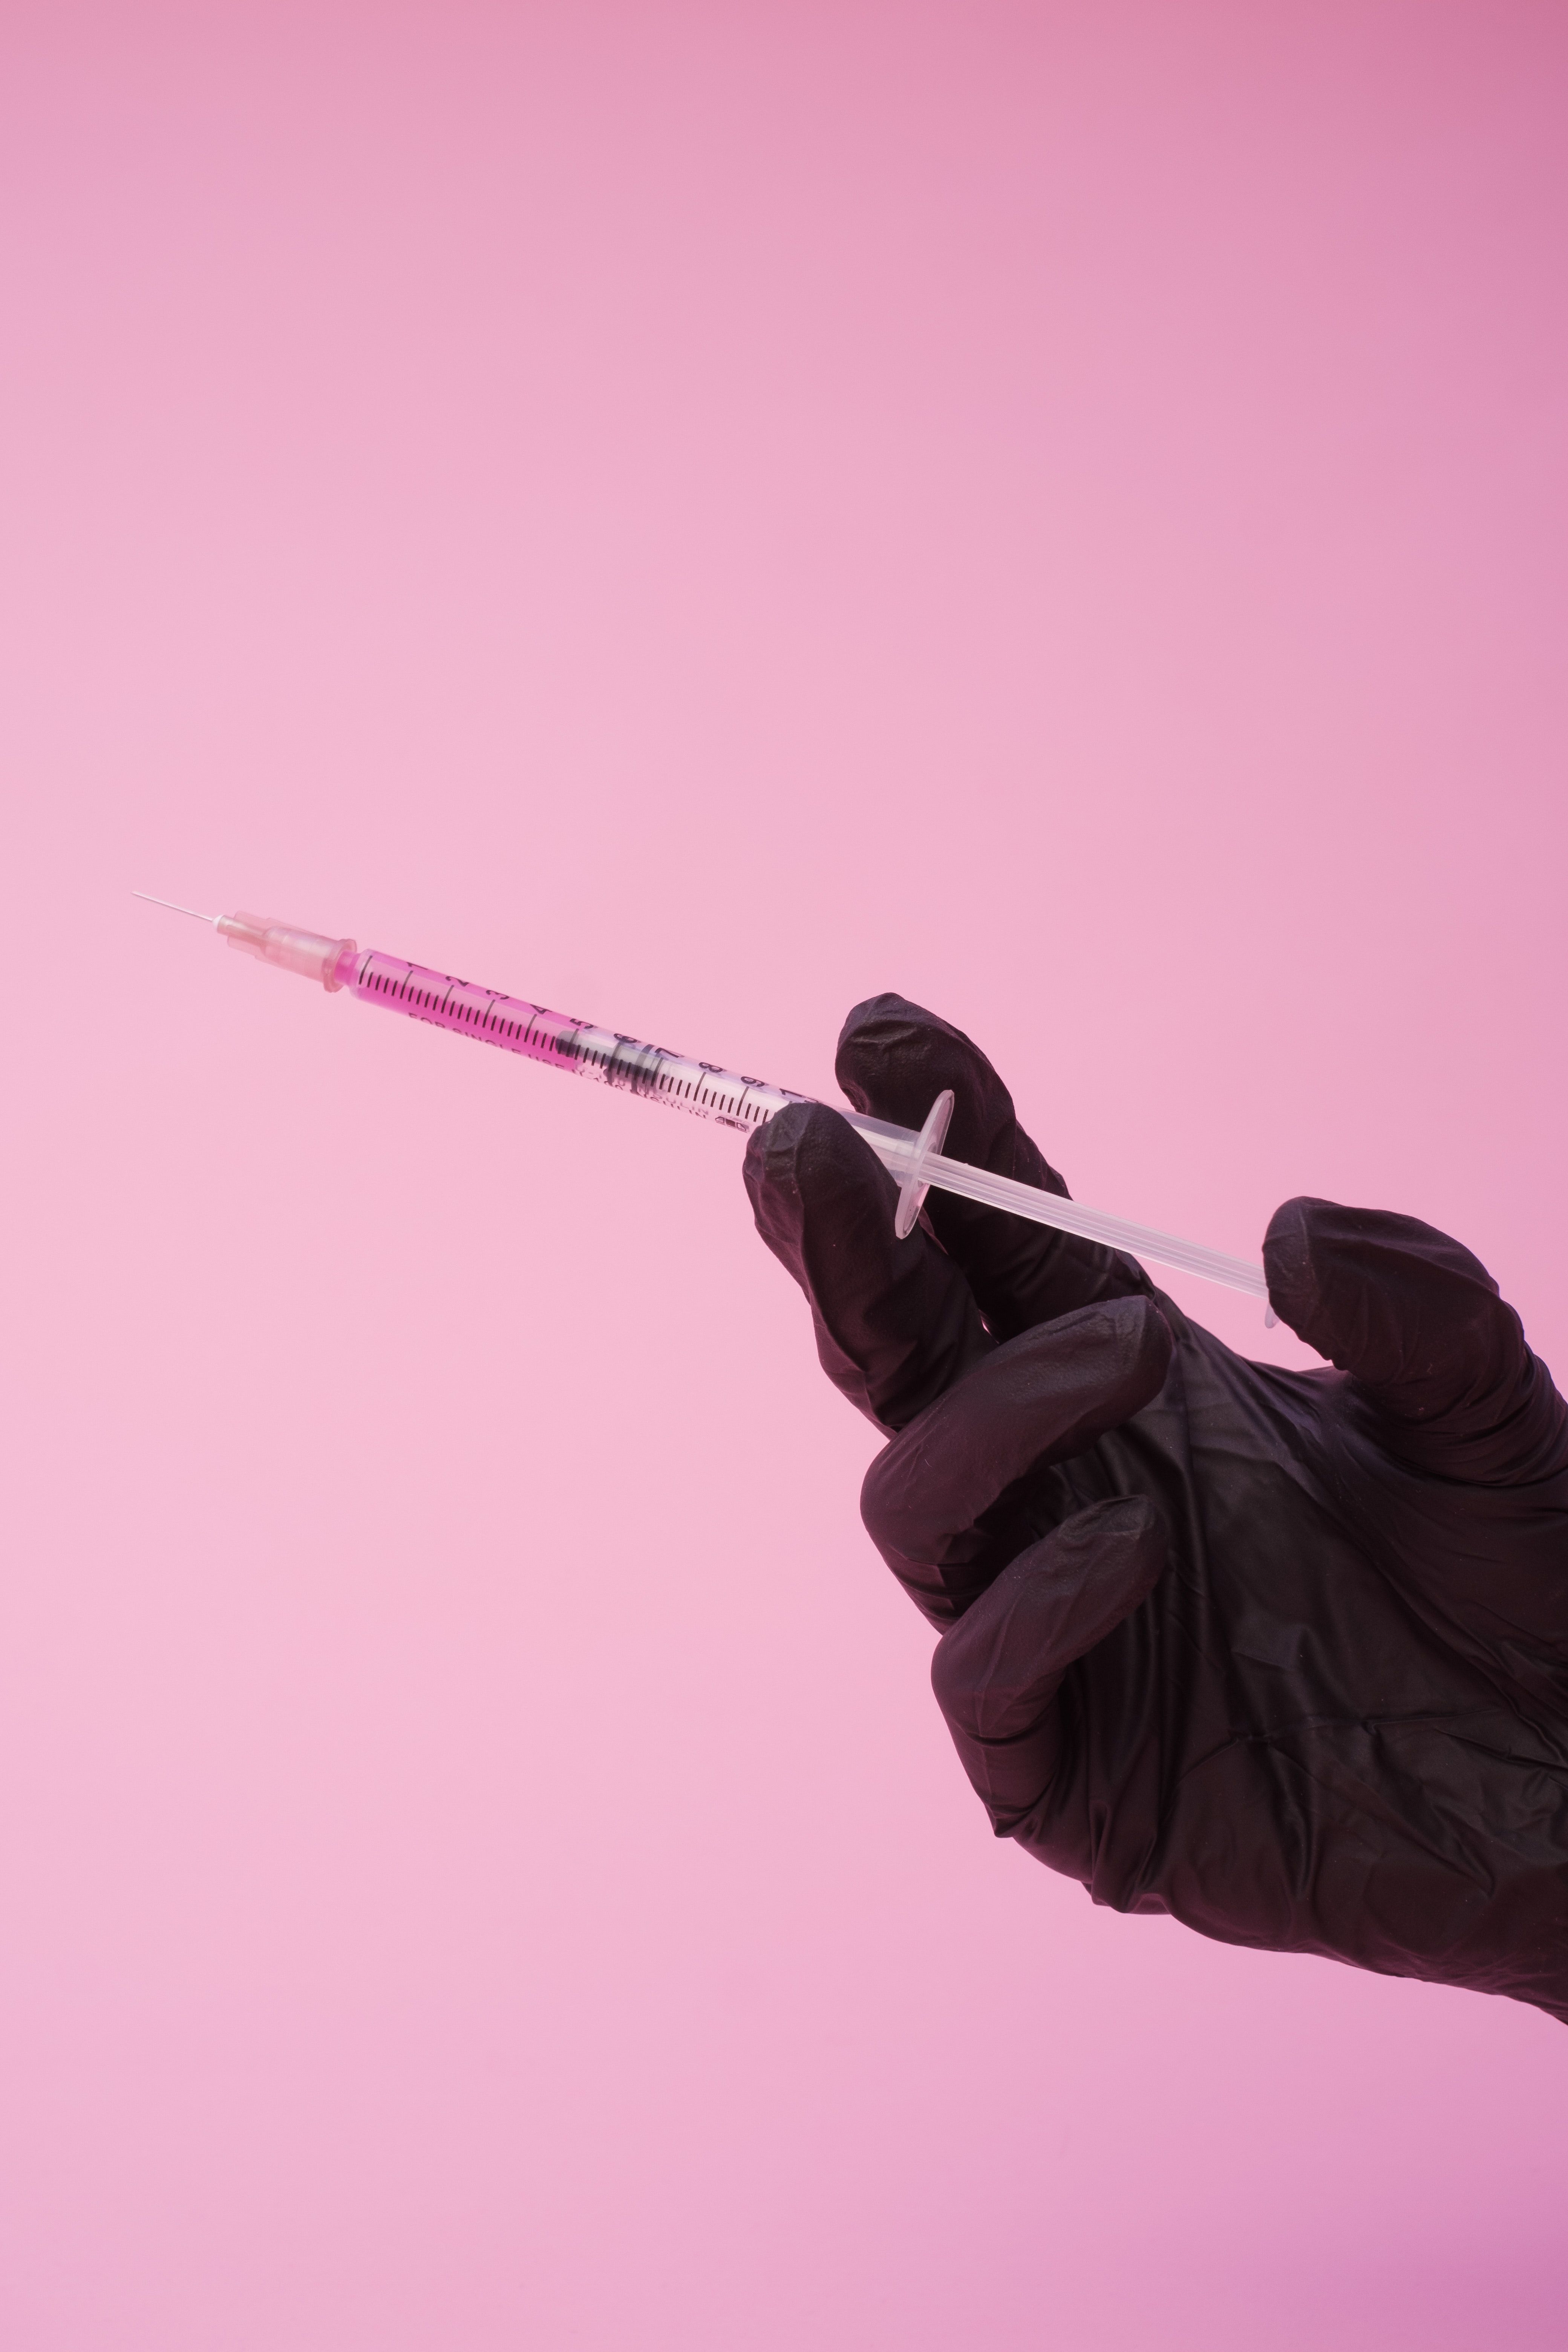 Crop nurse with syringe ready to vaccinate patients · Free